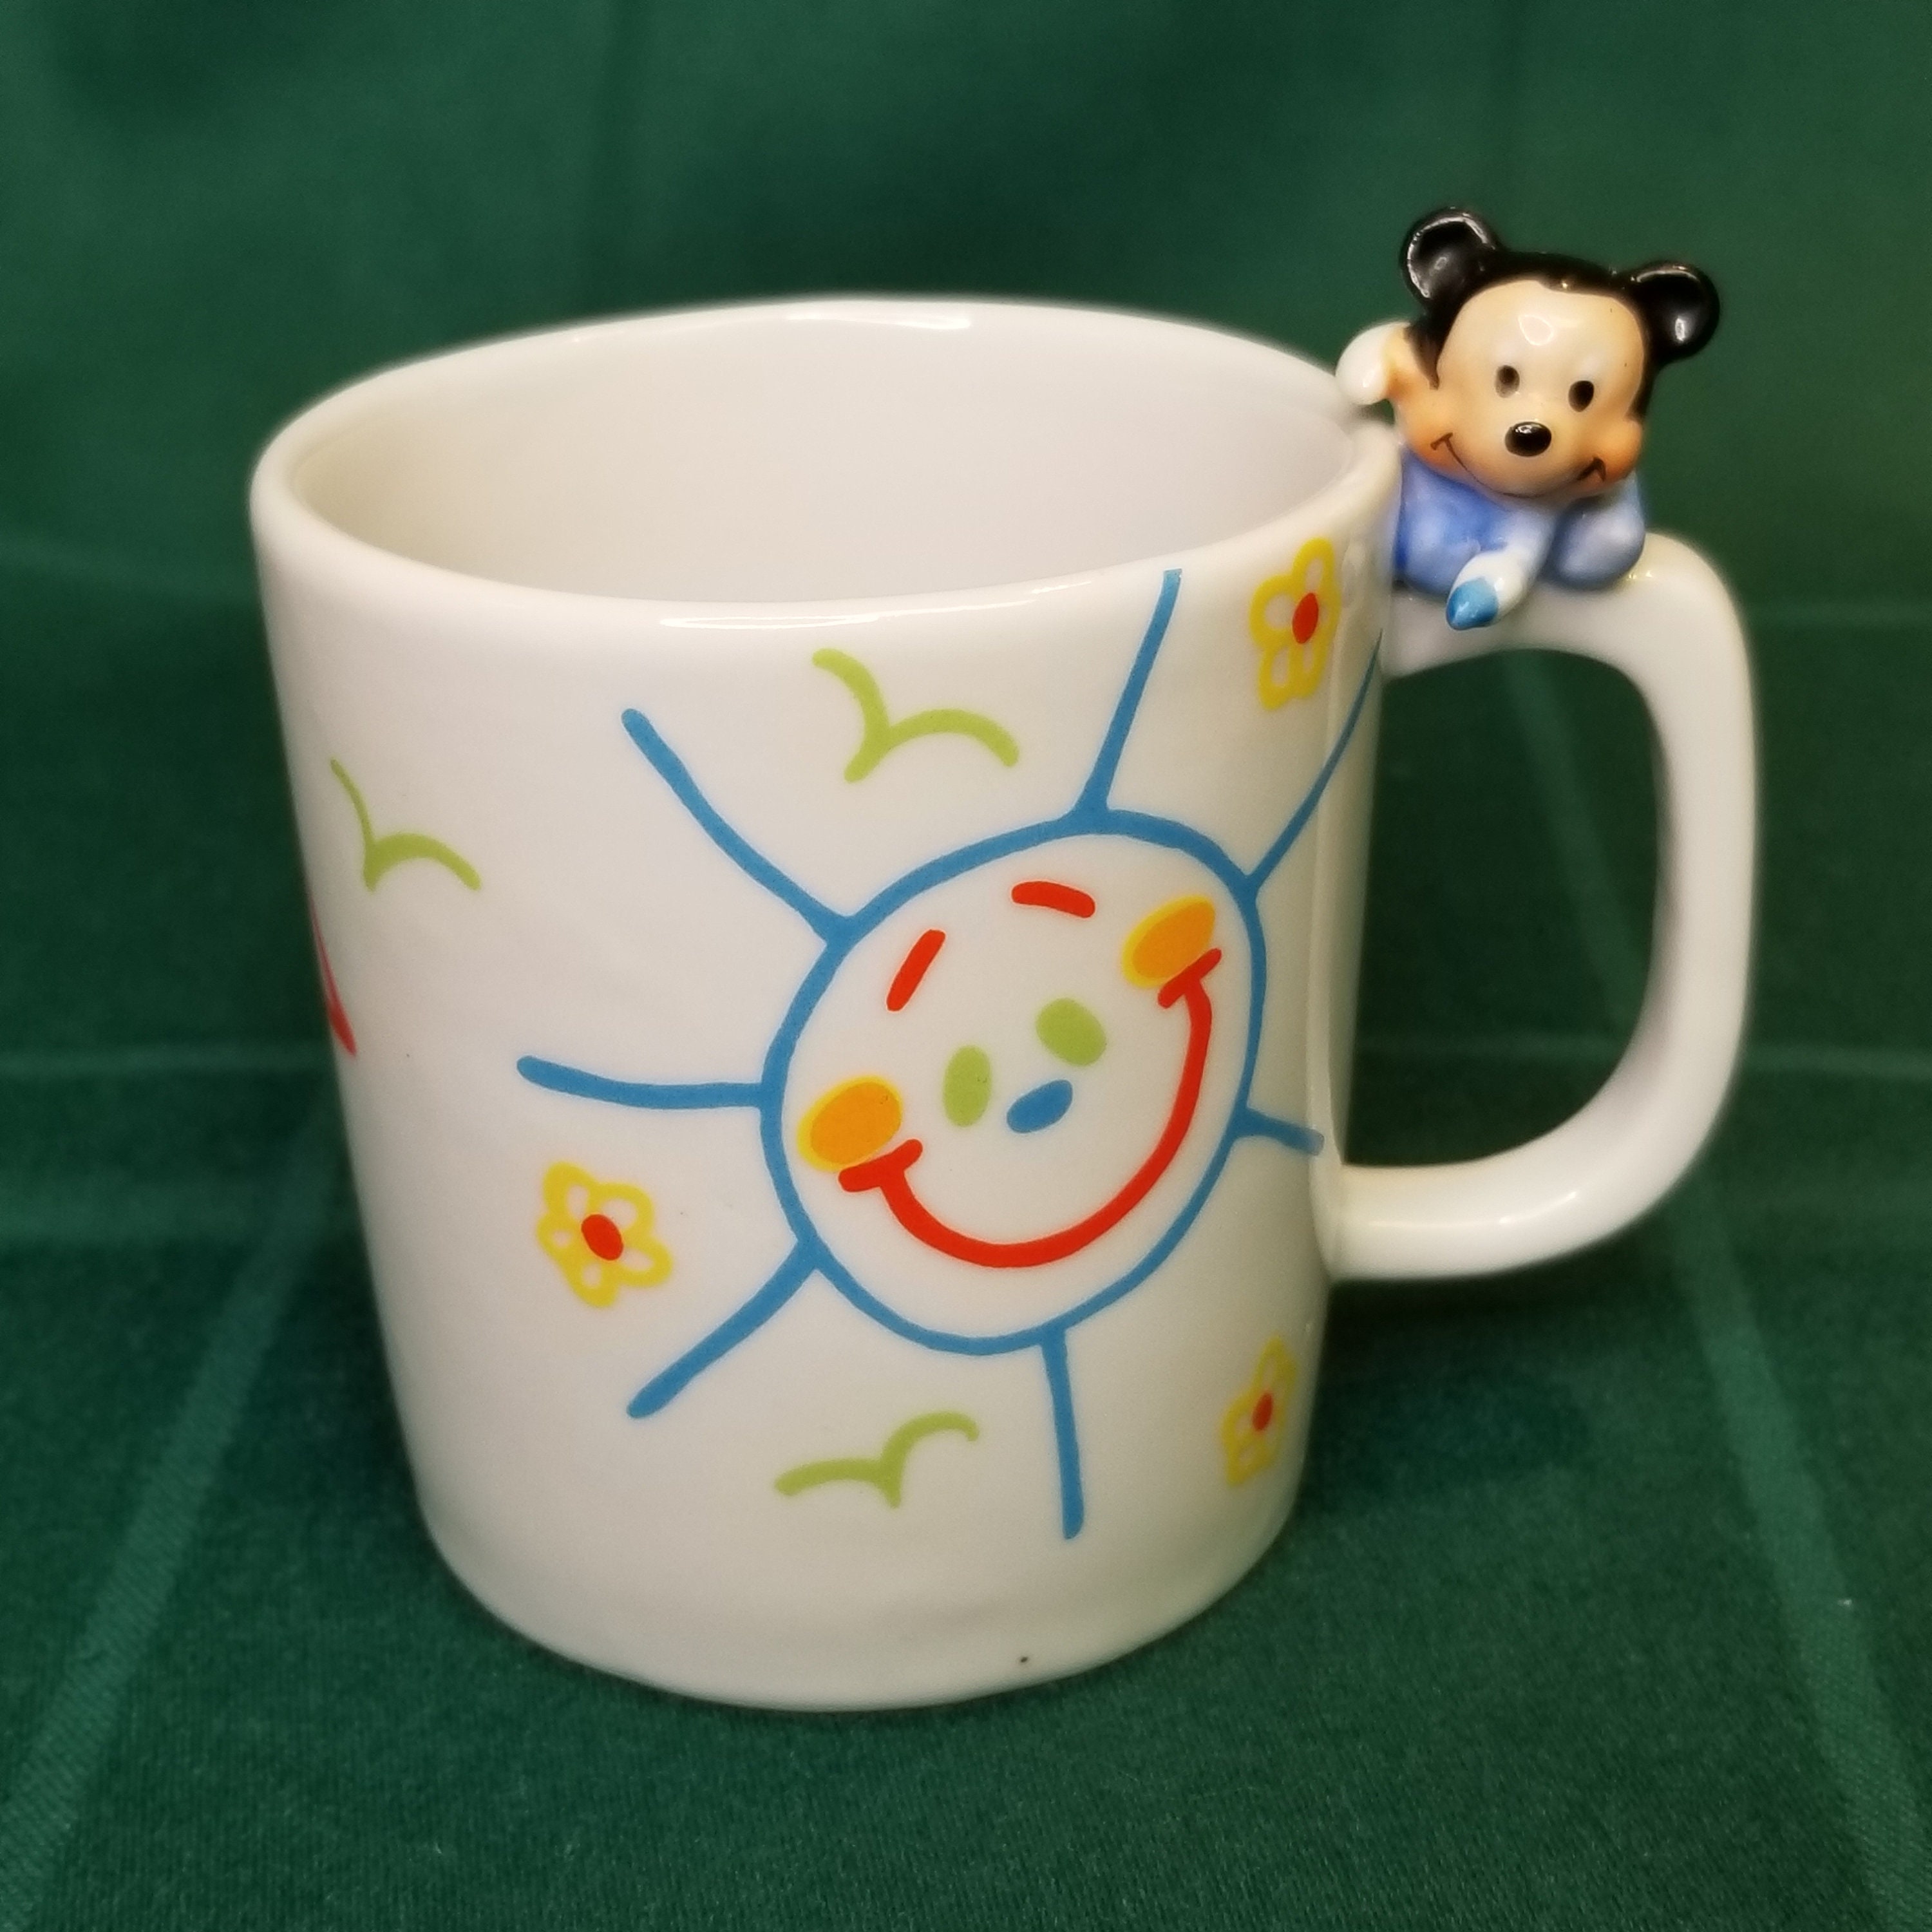 Disney Mickey Mouse Laughing Ceramic Espresso Mug with Spoon